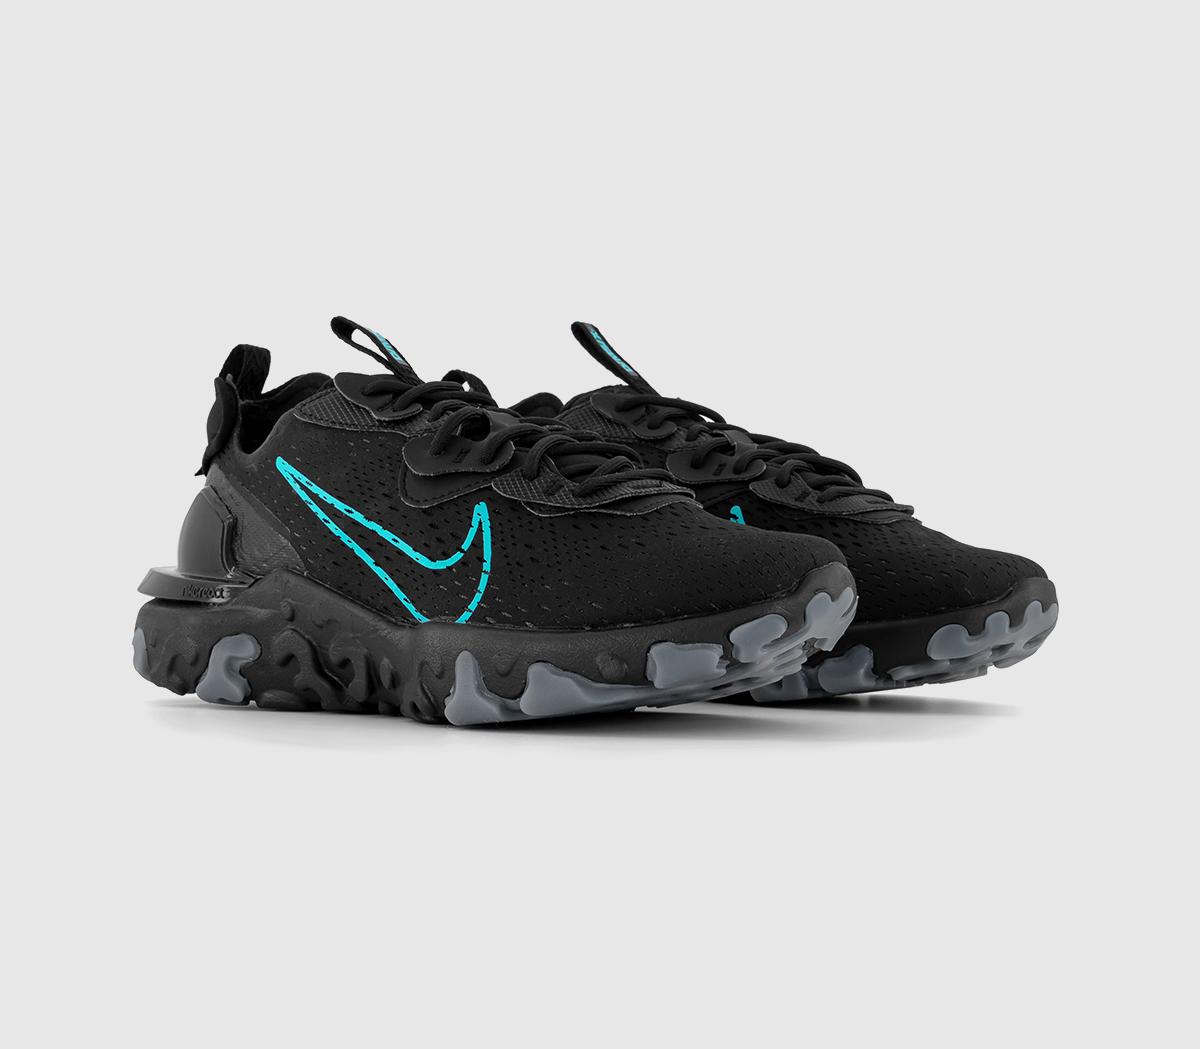 Nike React Vision Trainers Black Dusty Cactus Cool Grey, 11